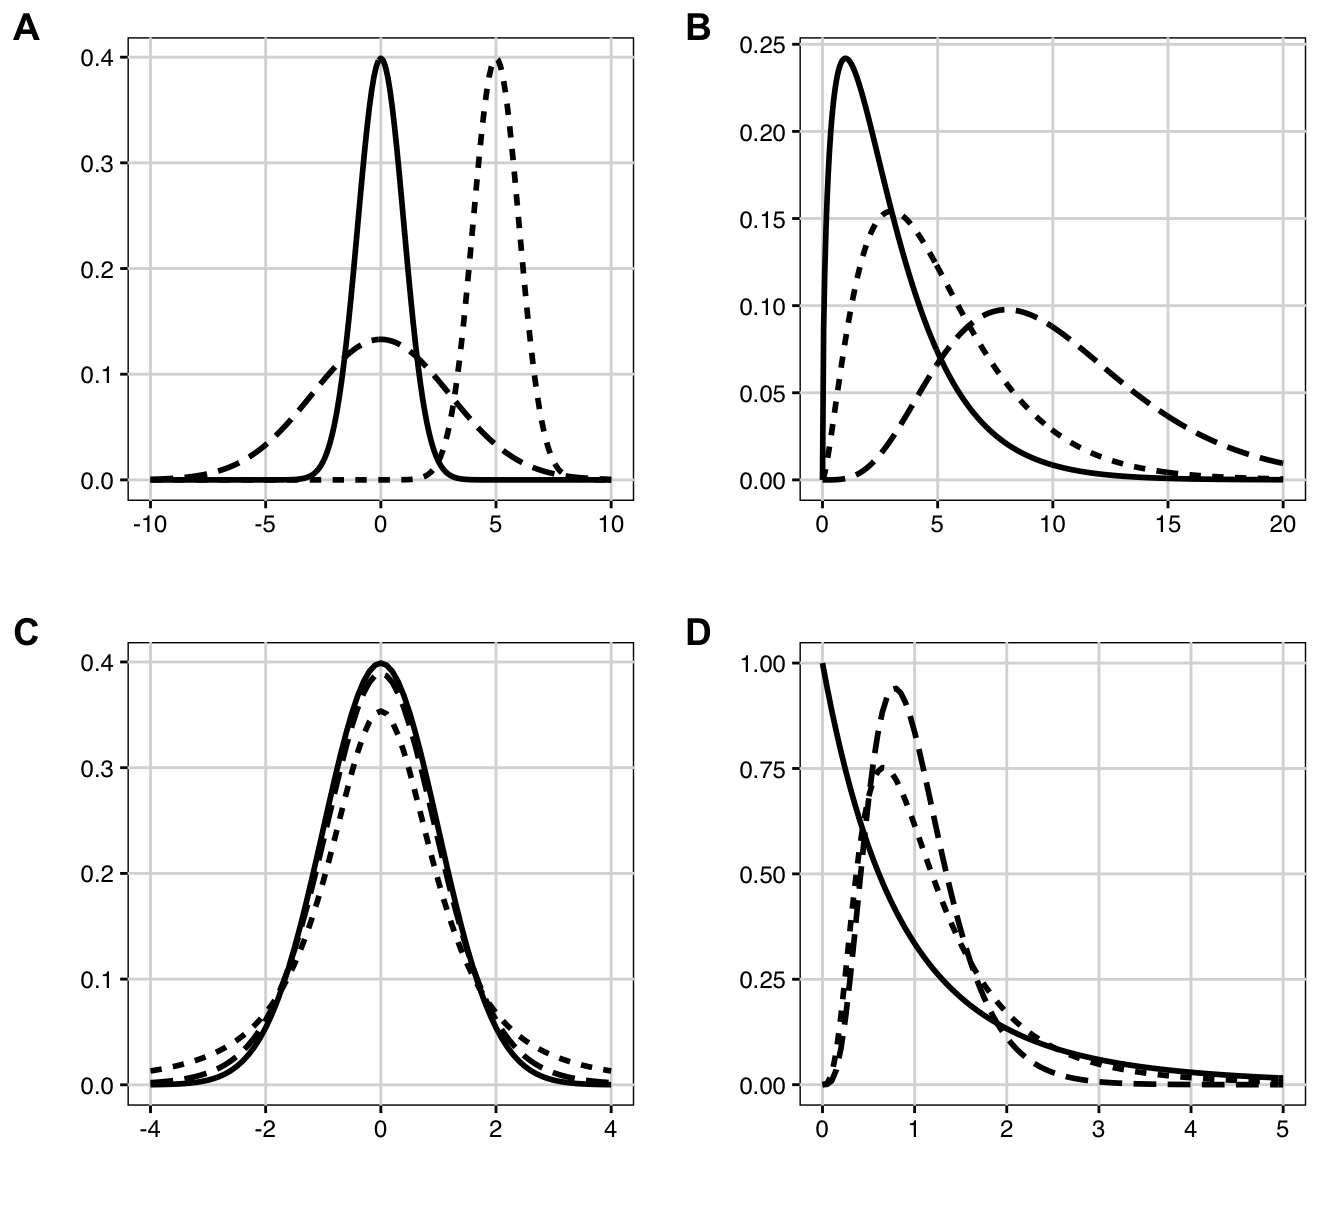 Probability densities. A: Normal distributions: standard normal with mean $\mu=0$, standard deviation $\sigma=1$ (solid); shifted: $\mu=5$, $\sigma=1$ (dotted); scaled: $\mu=0$, $\sigma=3$ (dashed). B: $\chi^2$-distributions with 3 (solid), 5 (dotted) and 10 (dashed) degrees of freedom. C: $t$-distributions with 2 (dotted) and 10 (dashed) degrees of freedom and standard normal density (solid). D: $F$-distributions with $(n=2, m=10)$ numerator/denominator degrees of freedom (solid), respectively $(n=10, m=10)$ (dotted) and $(n=10, m=100)$ (dashed).